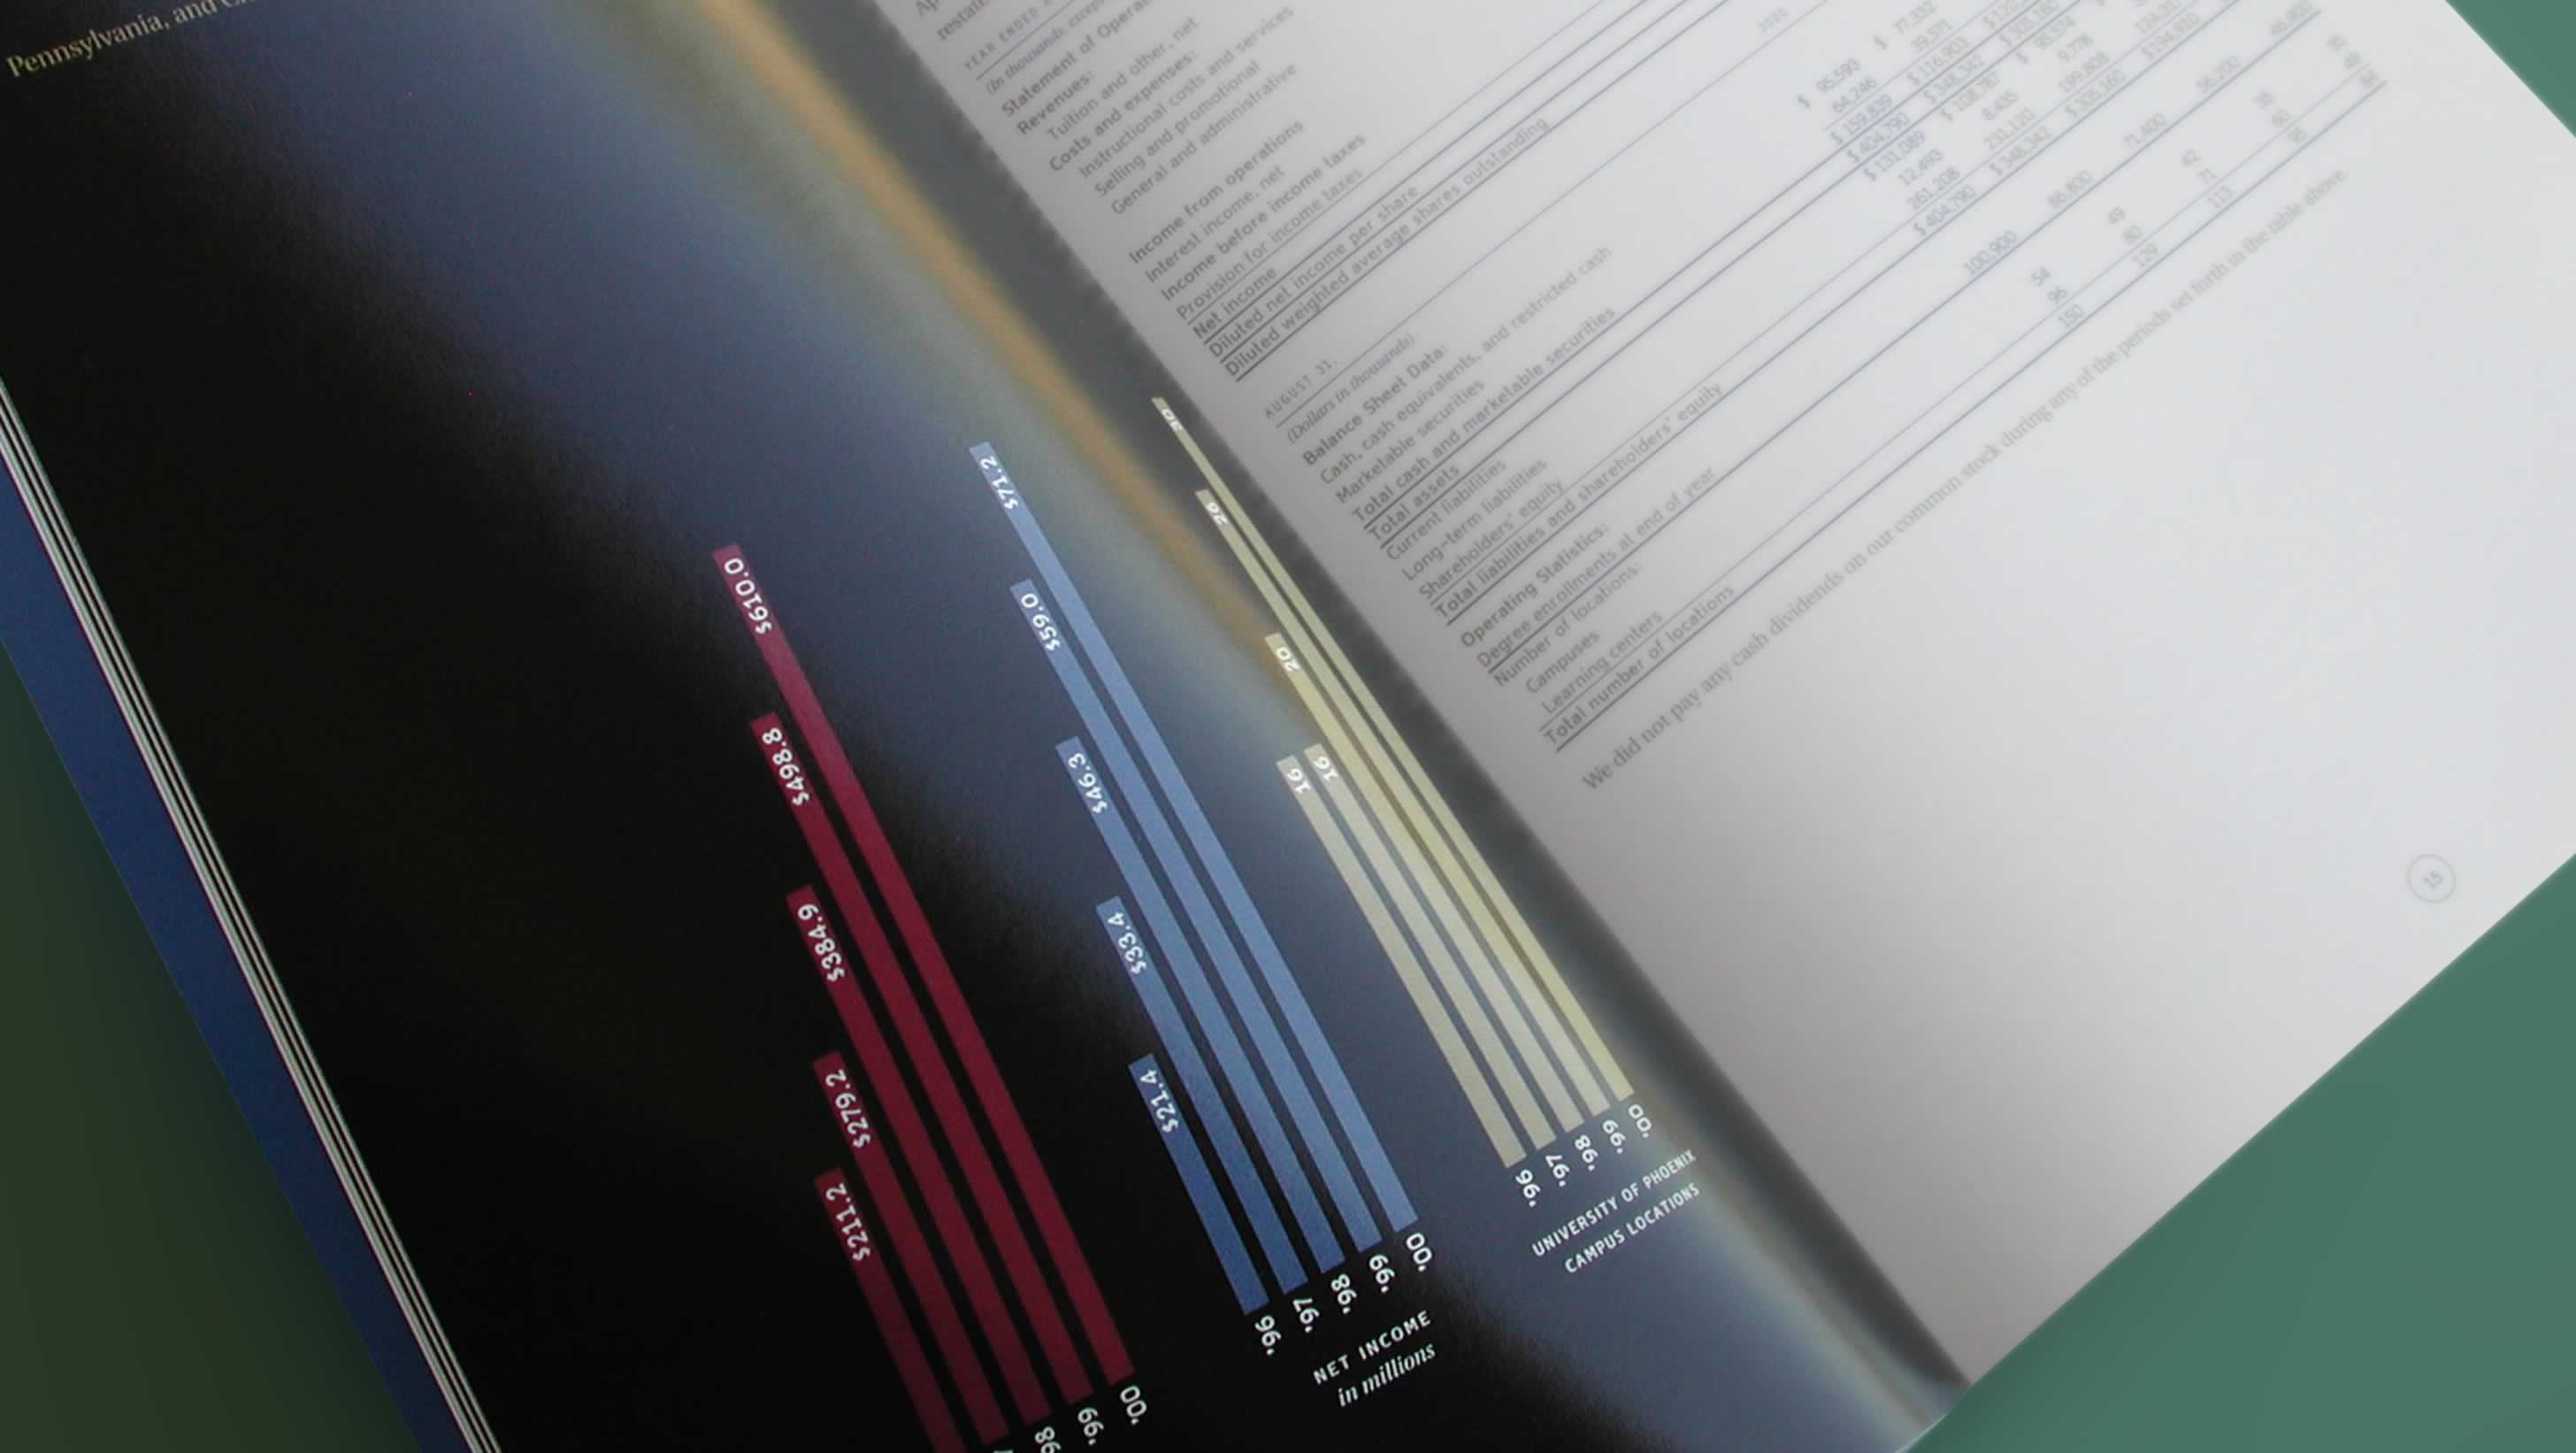 Education Industry Annual Report Design